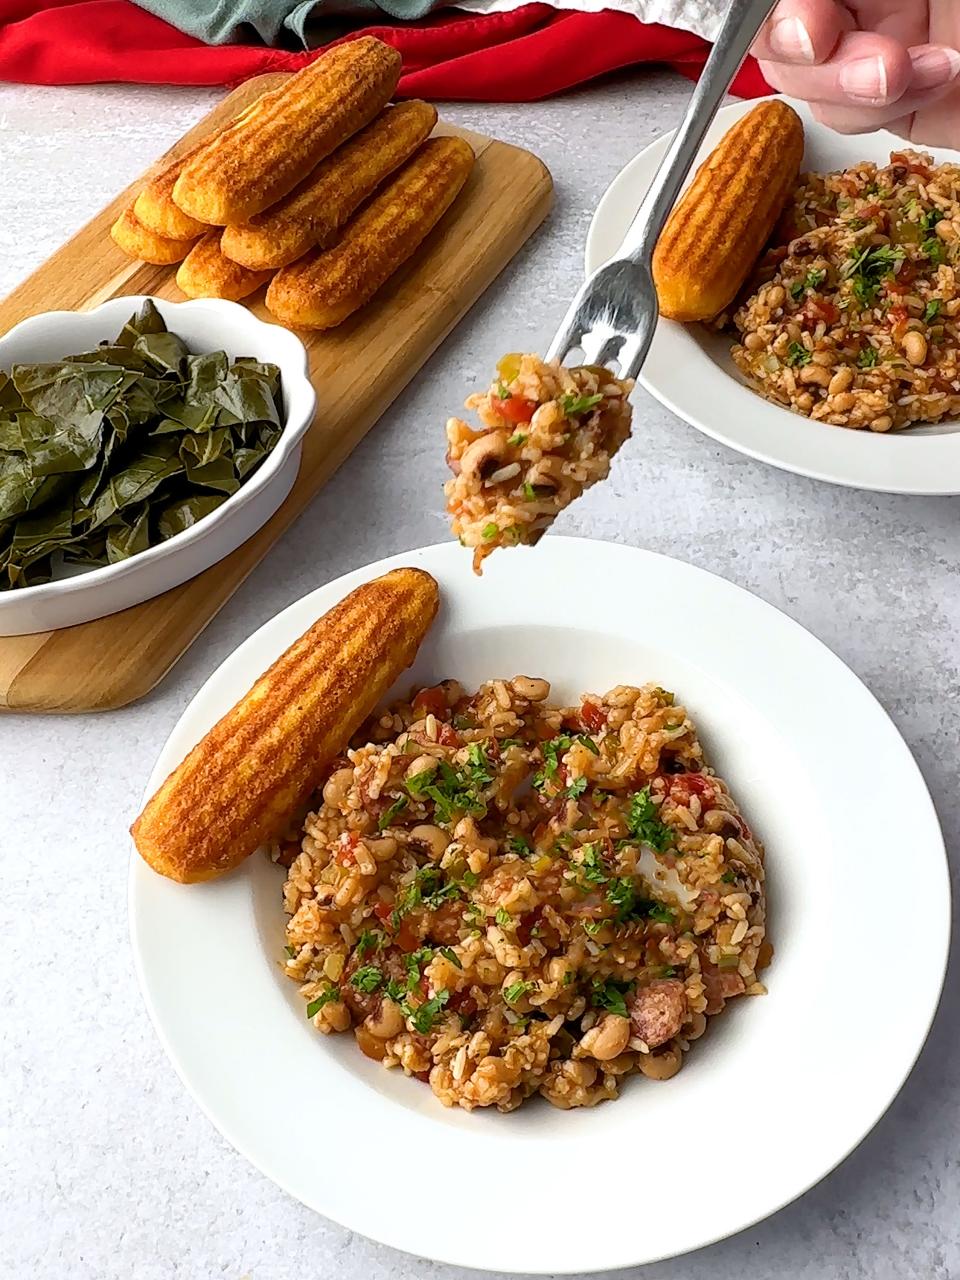 Black-Eyed Pea Jambalaya uses a can of black-eyed peas along with sausage, rice, and the holy trinity of onions, celery, bell pepper and garlic.